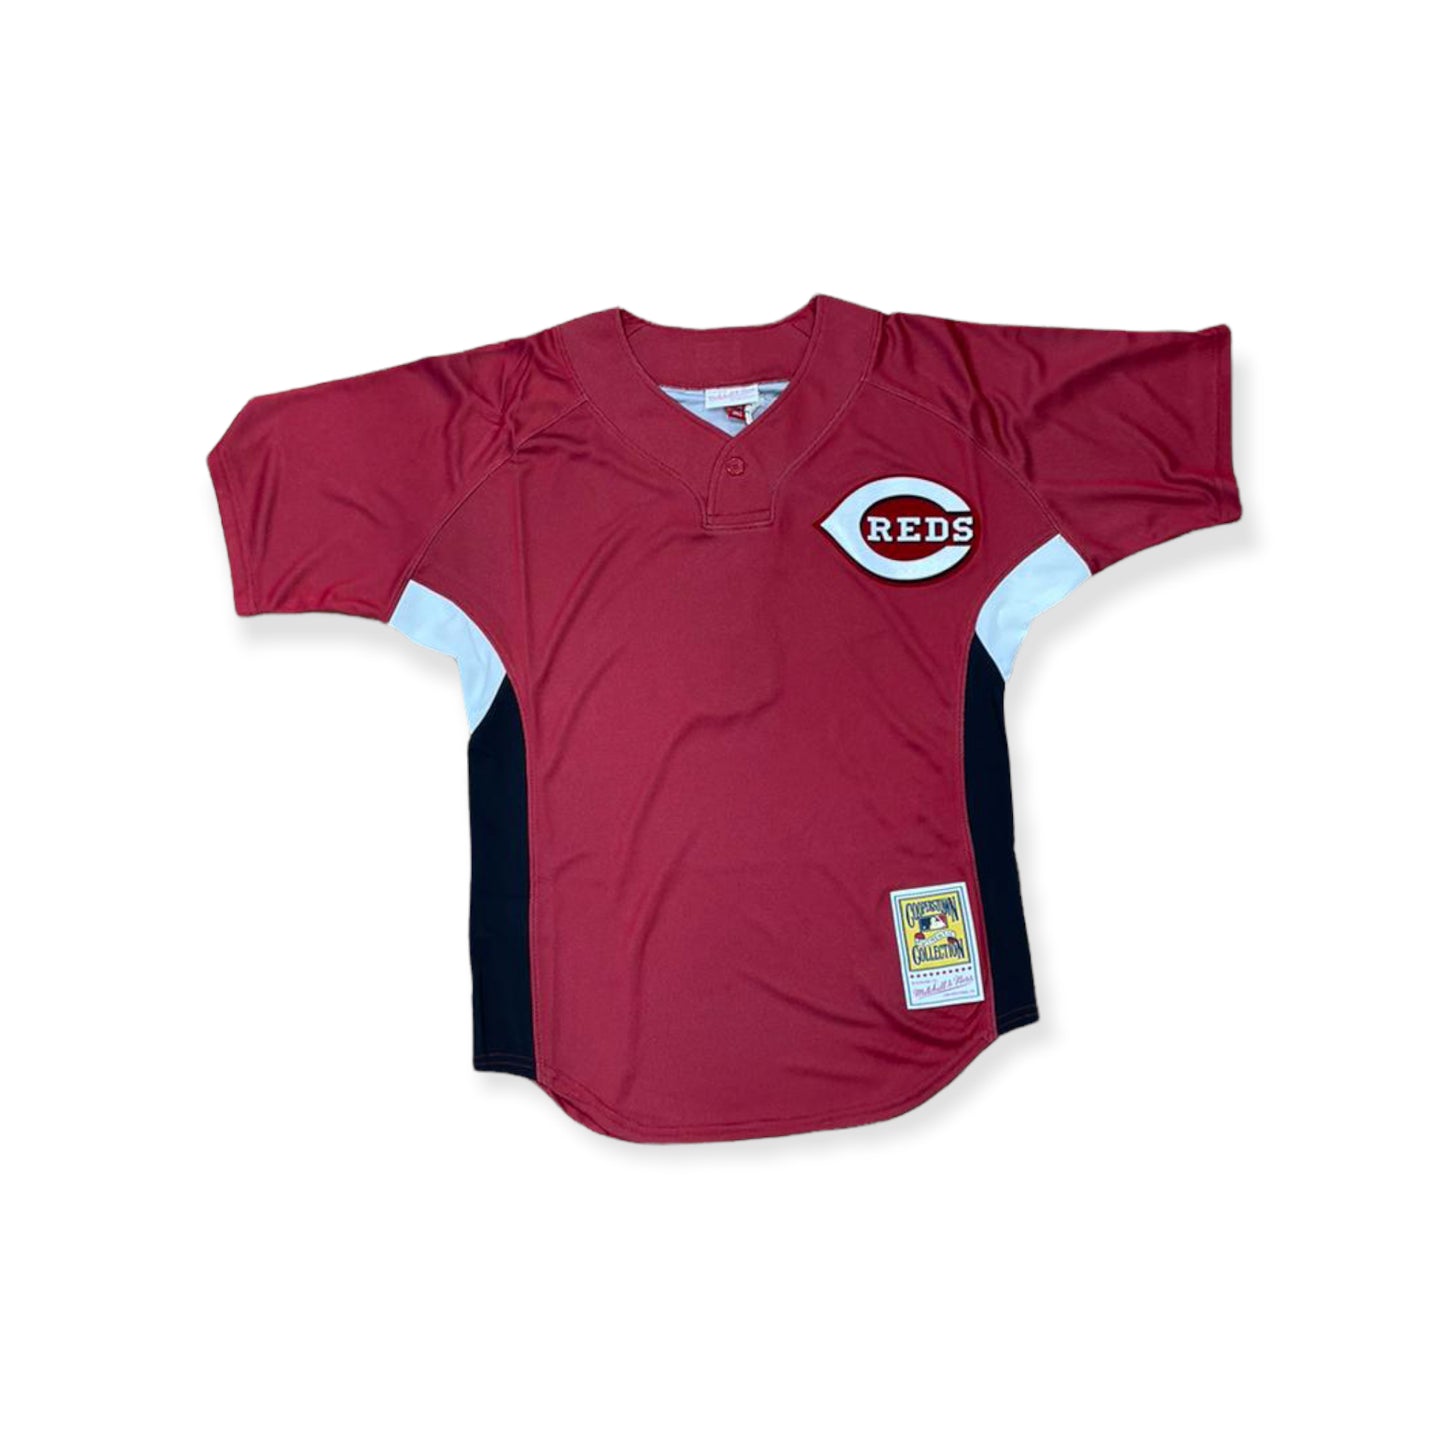 Mitchell & Ness: Pullover Reds Ken Griffey Jr. Jersey – On Time